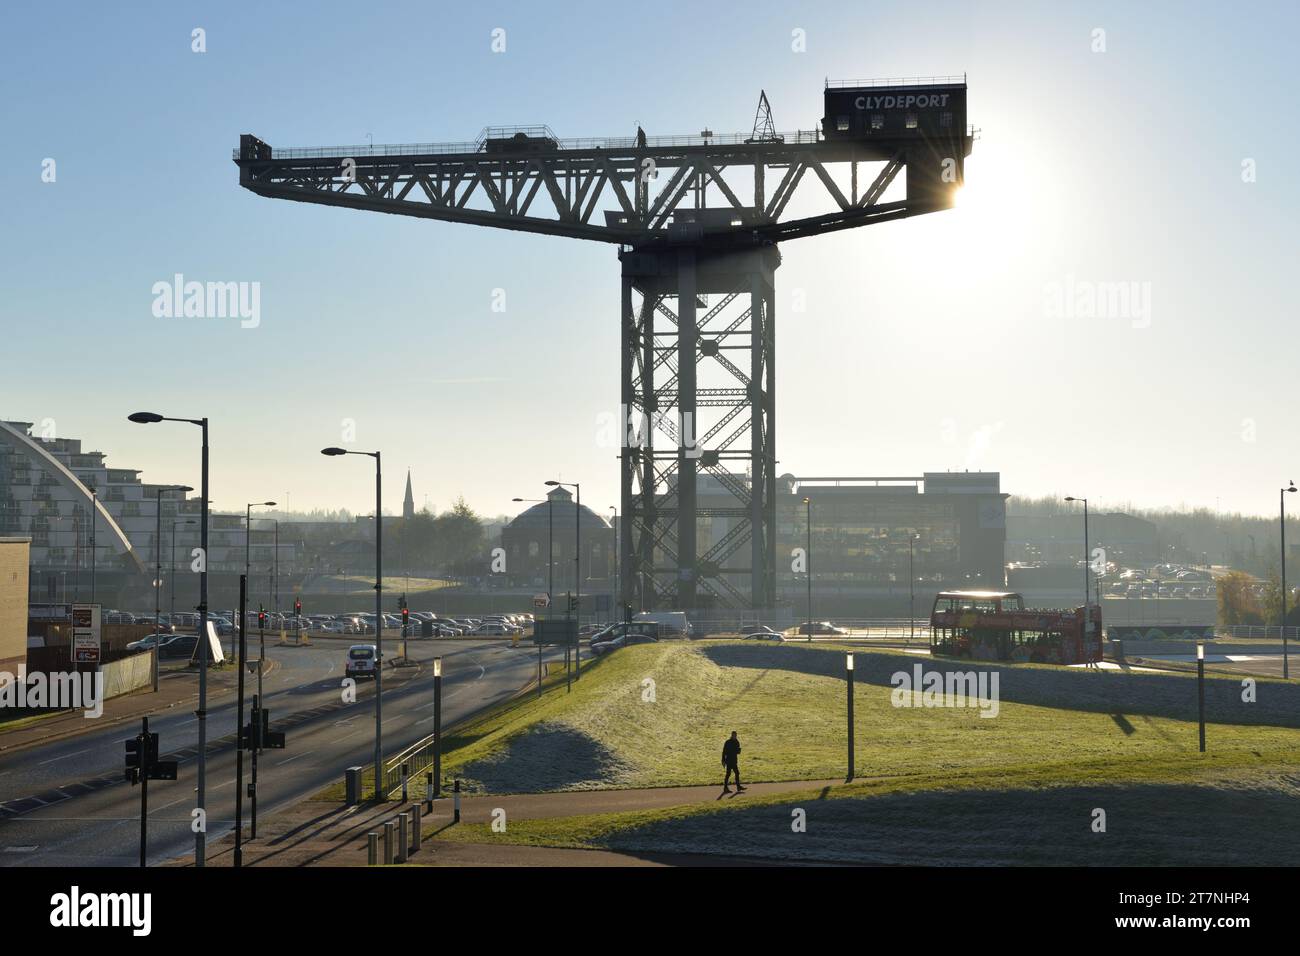 A view of the iconic Clydeport Finnieston Crane also known as Stobcross crane in Glasgow, Scotland. Stock Photo